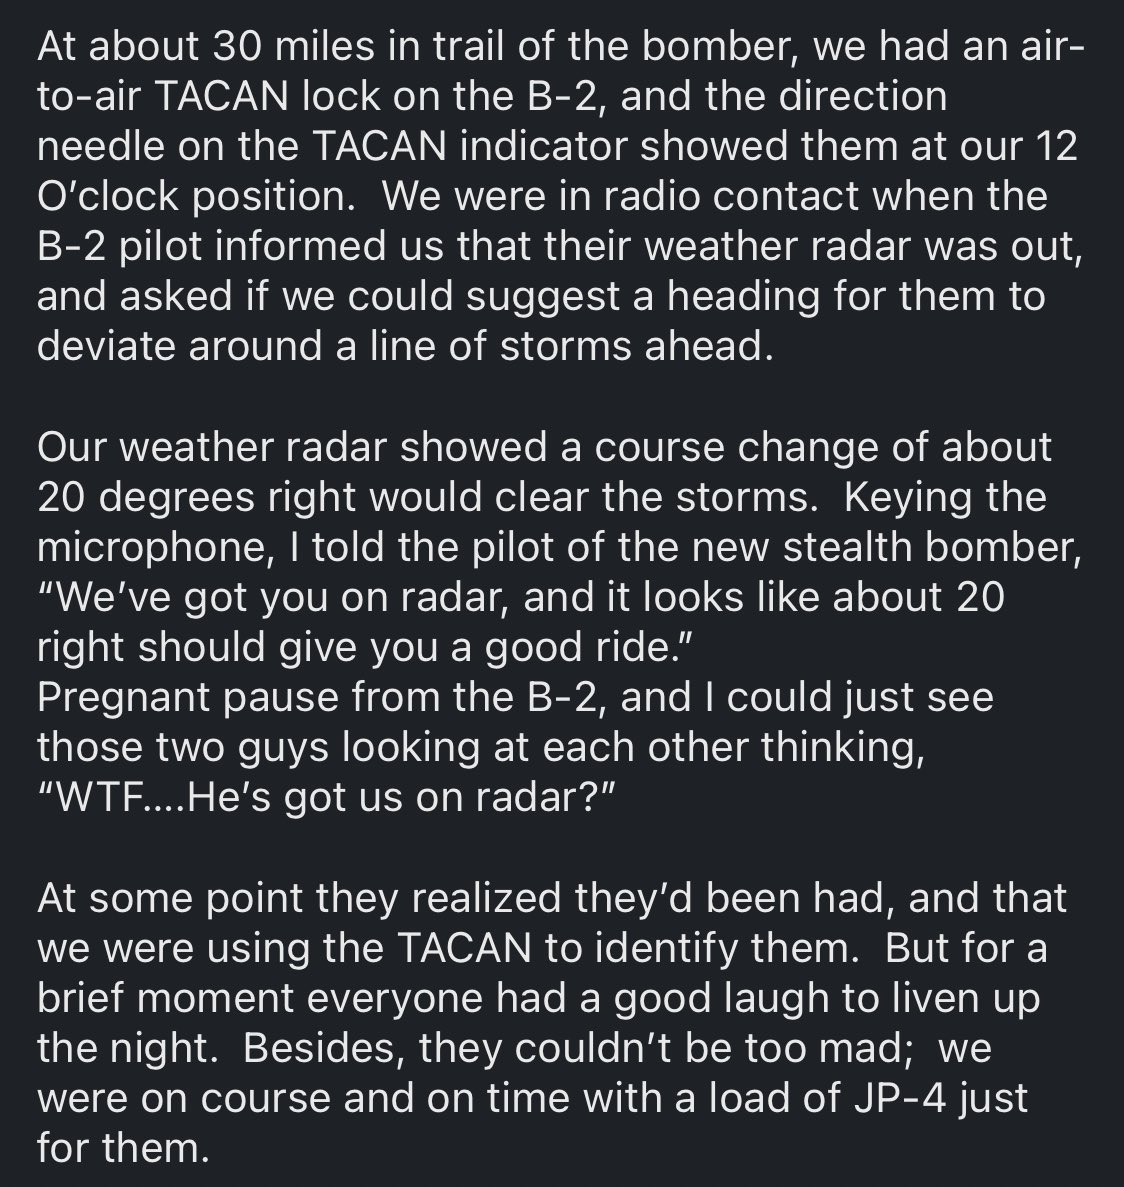 @MCCCANM It’s not mine but I found it when searching for the OTHER B-2 story I assume everyone knows (about it being caught on radar). Enjoy..